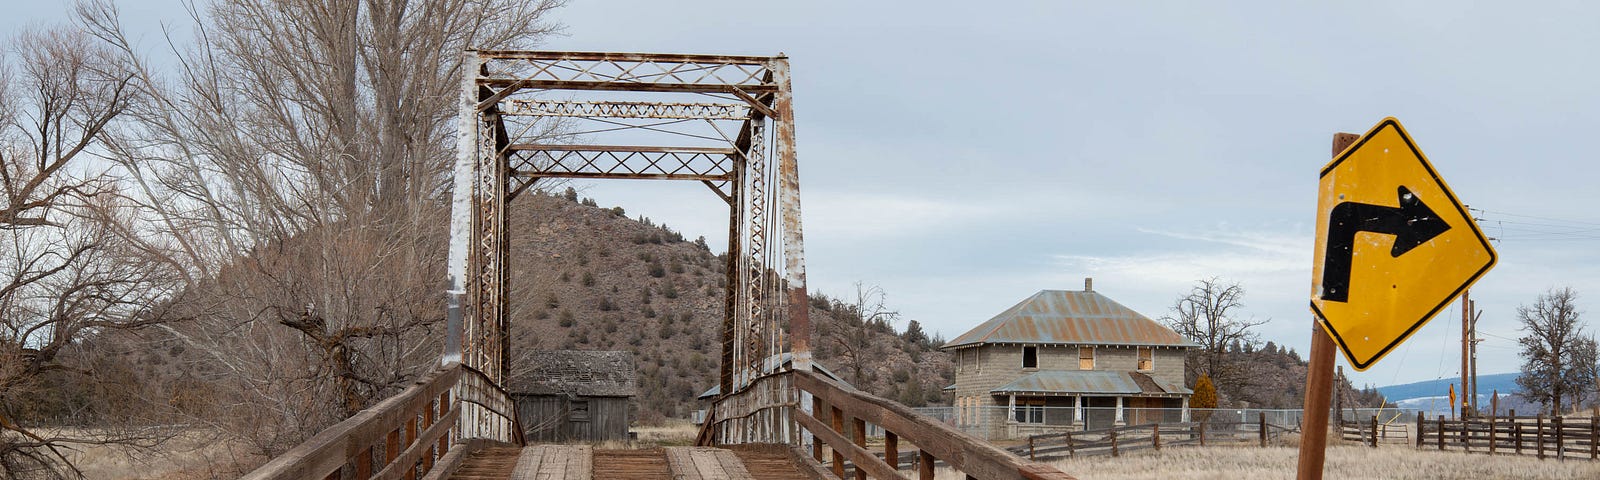 An old one-lane wood-and-iron bridge across a small river on a rural two-lane dirt road, with a farmhouse in the background.